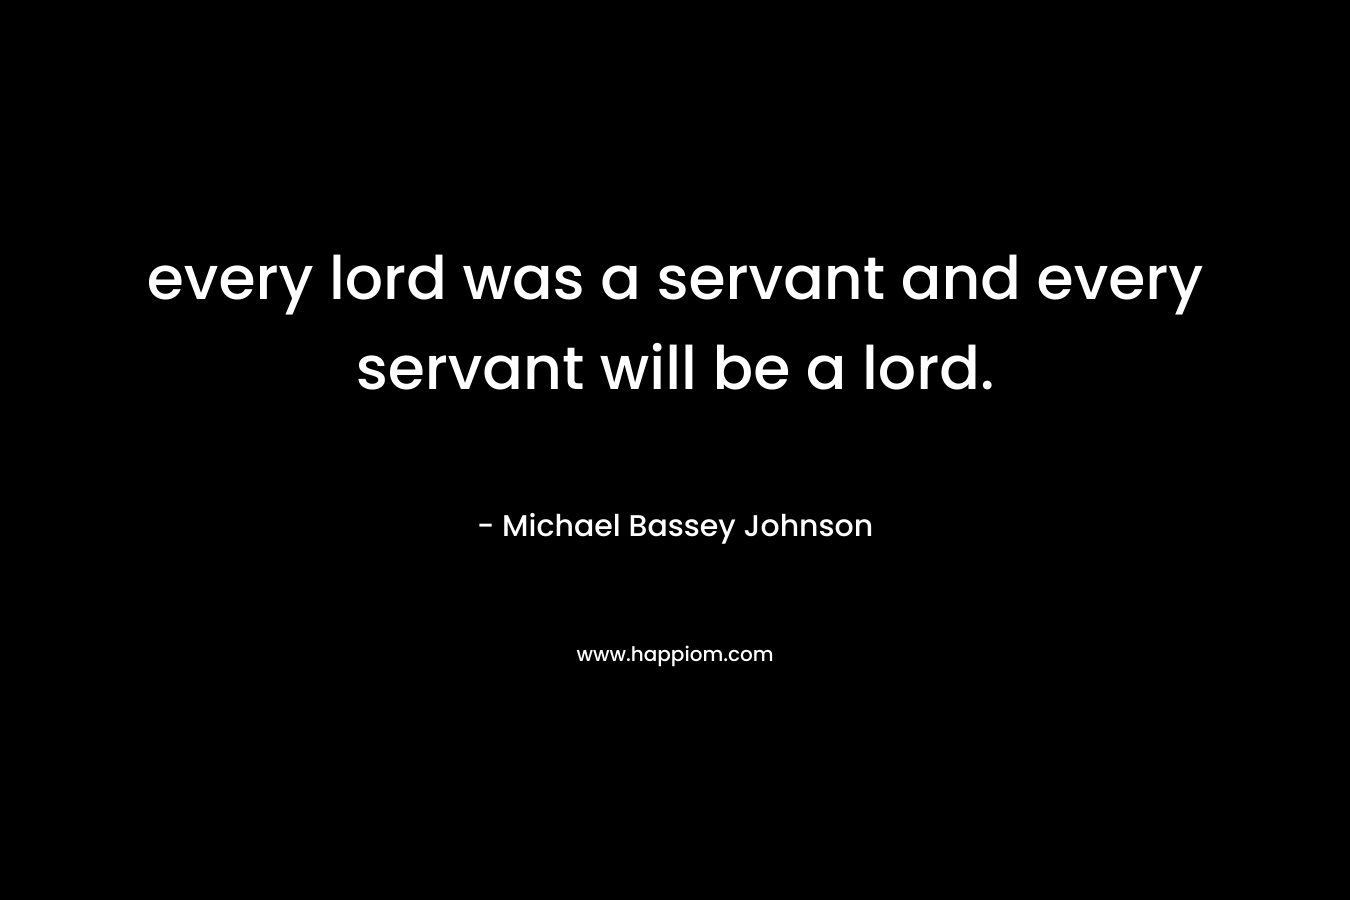 every lord was a servant and every servant will be a lord.